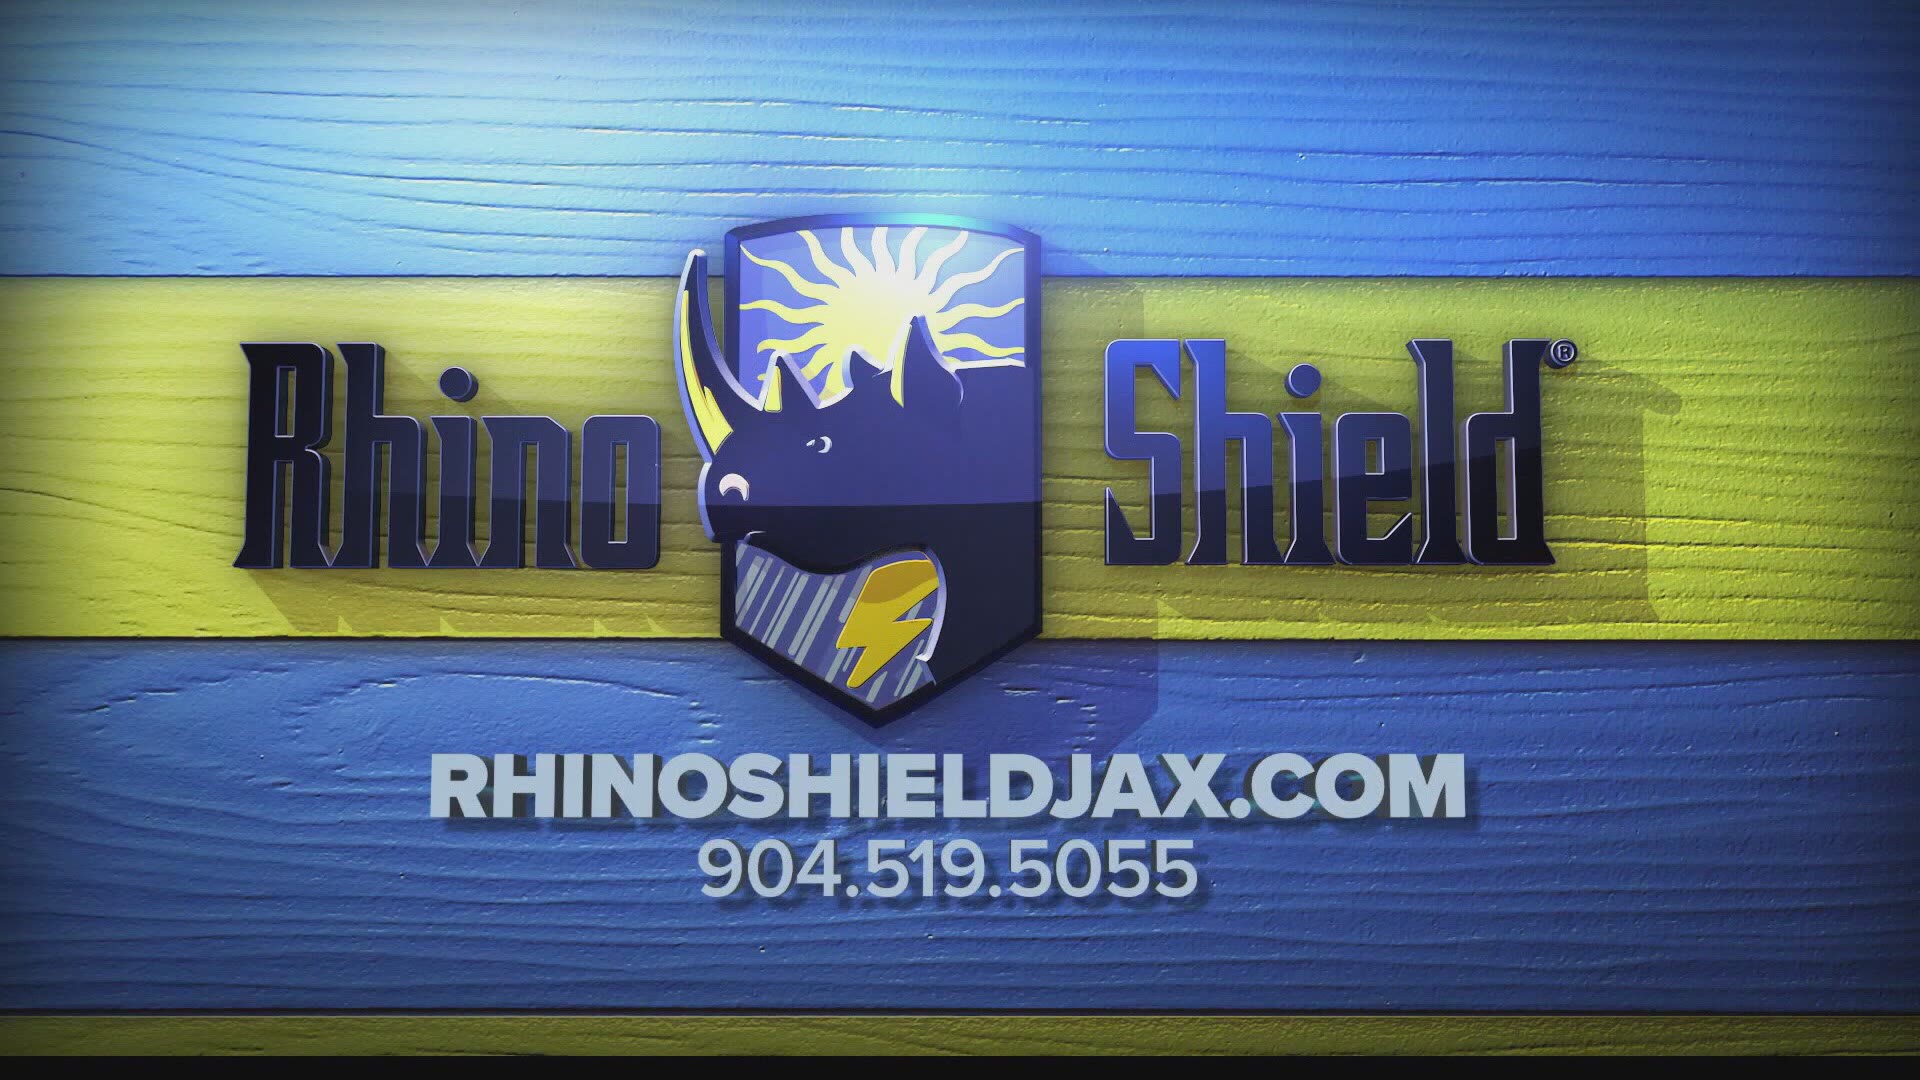 Do you want to upgrade the look of your home? Rhino Shield can help.